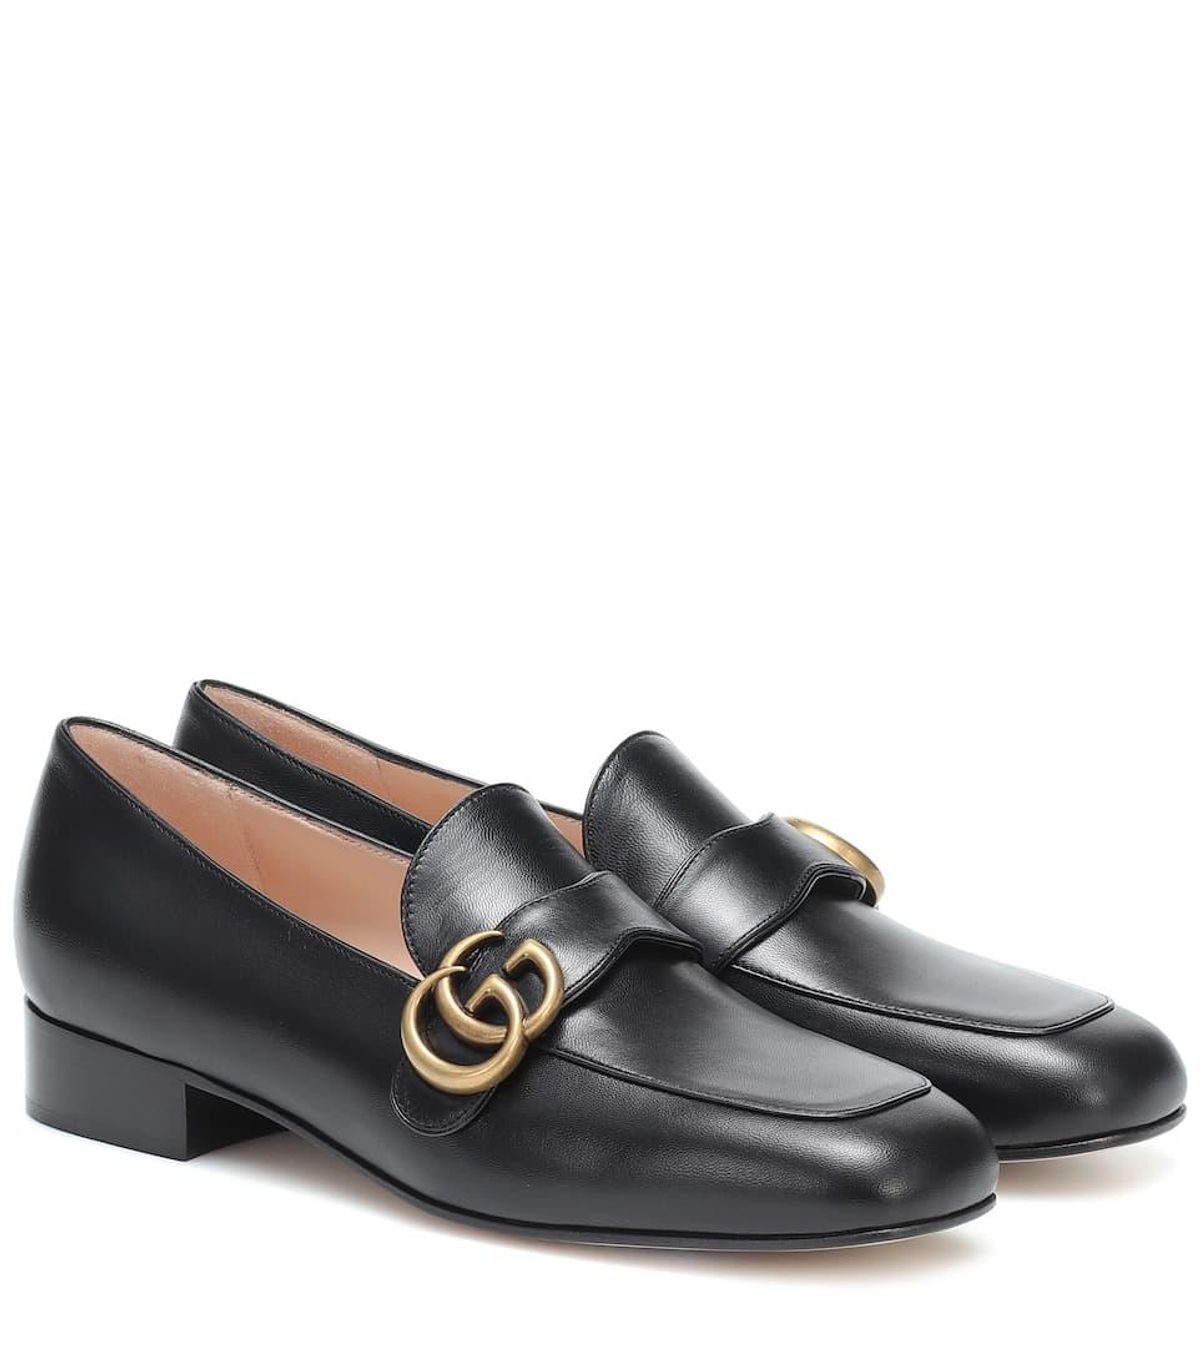 GG Marmont Leather Loafers